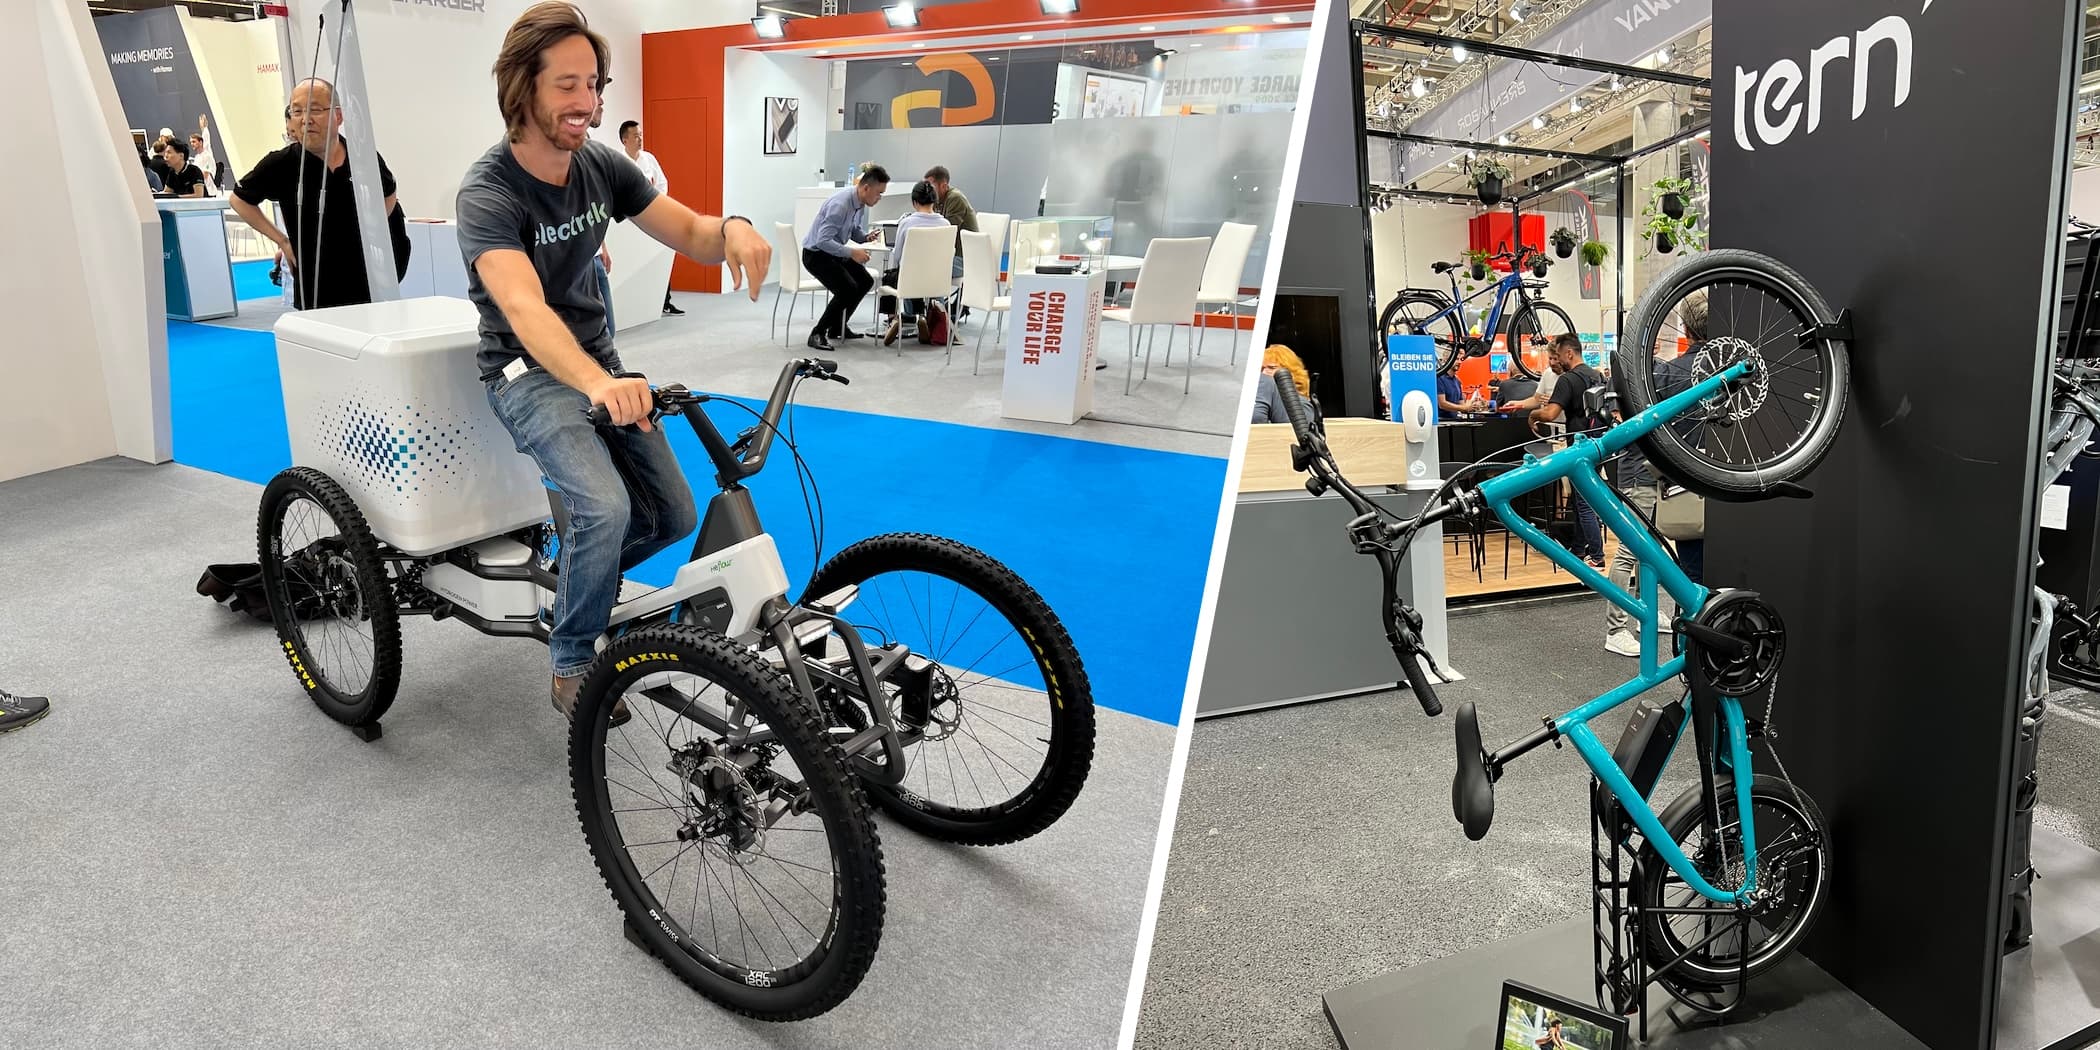 Eurobike 2022 Here are the coolest electric bikes we saw at the show!